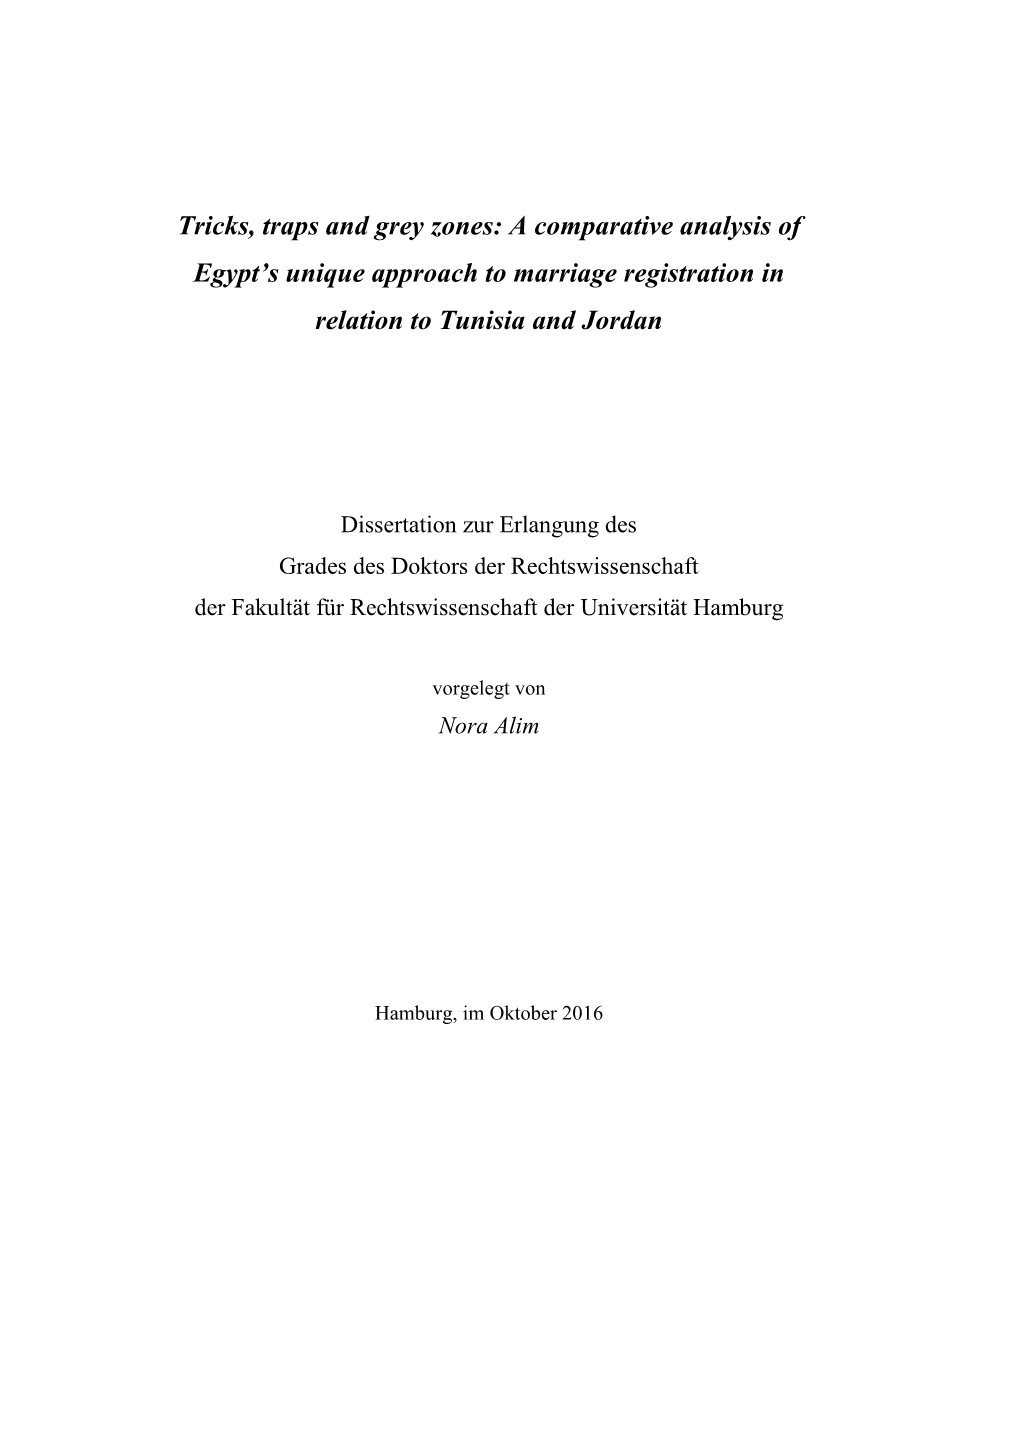 A Comparative Analysis of Egypt's Unique Approach to Marriage Registration in Relation to Tunisi